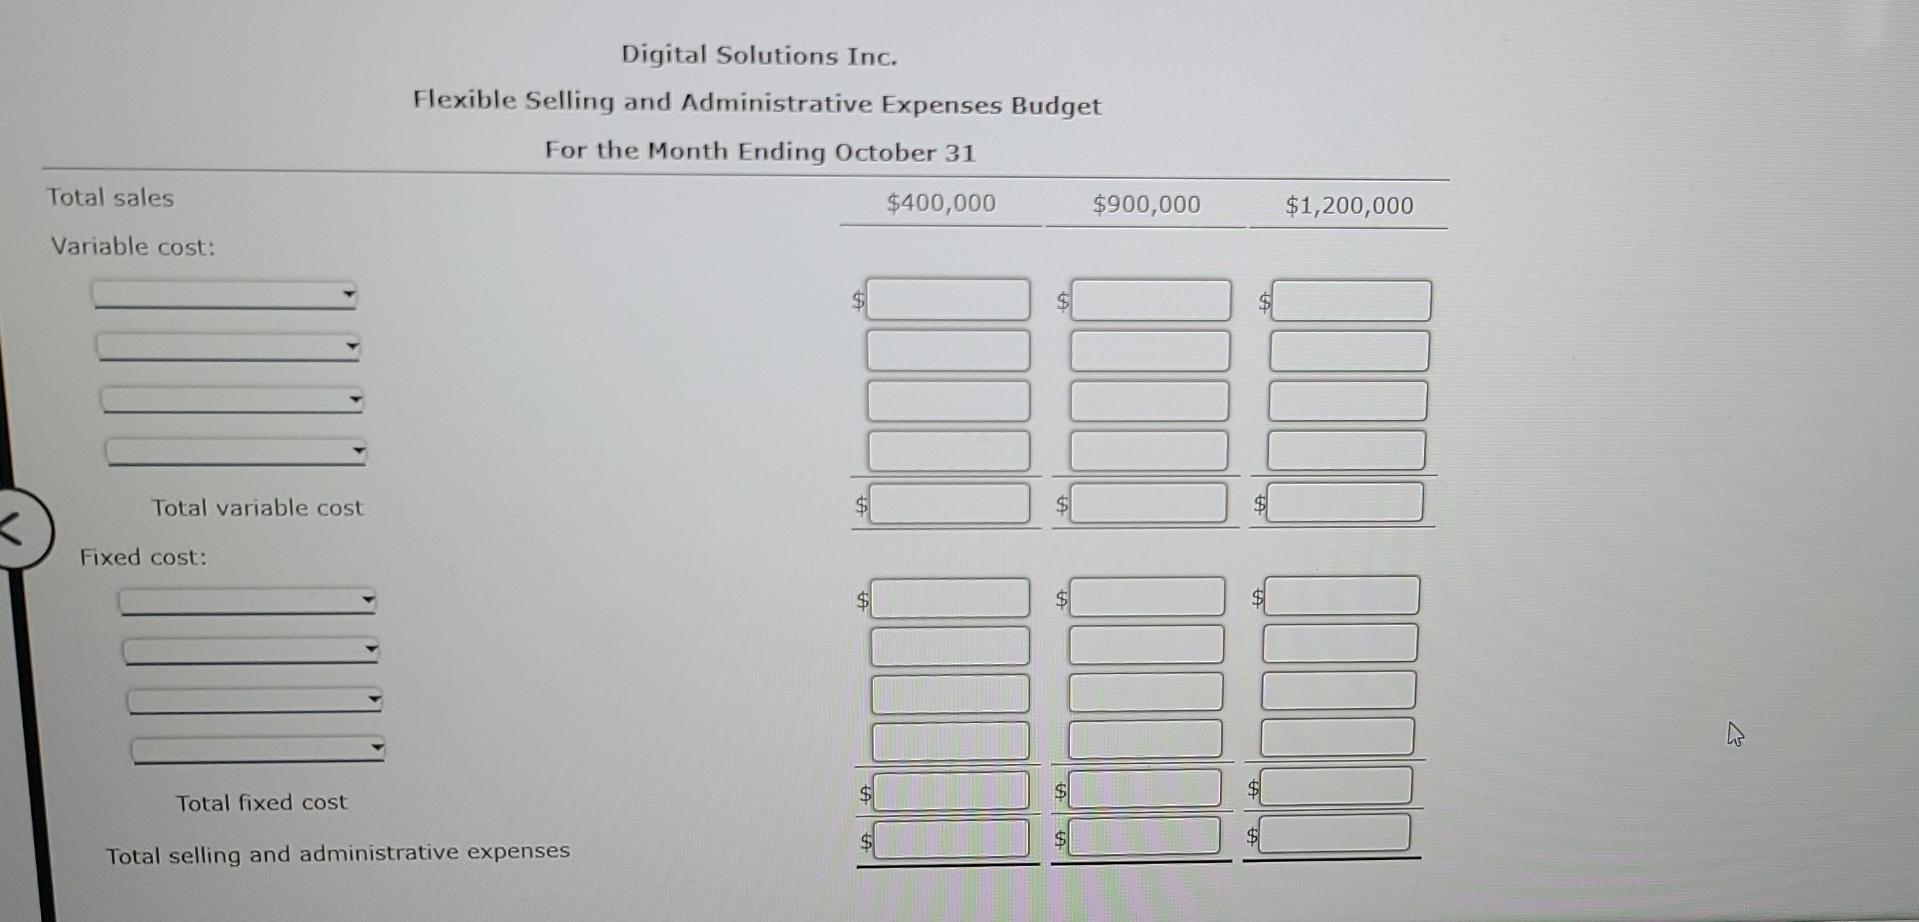 Digital Solutions Inc.Flexible Selling and Administrative Expenses BudgetFor the Month Ending October 31$400,000 $900,000